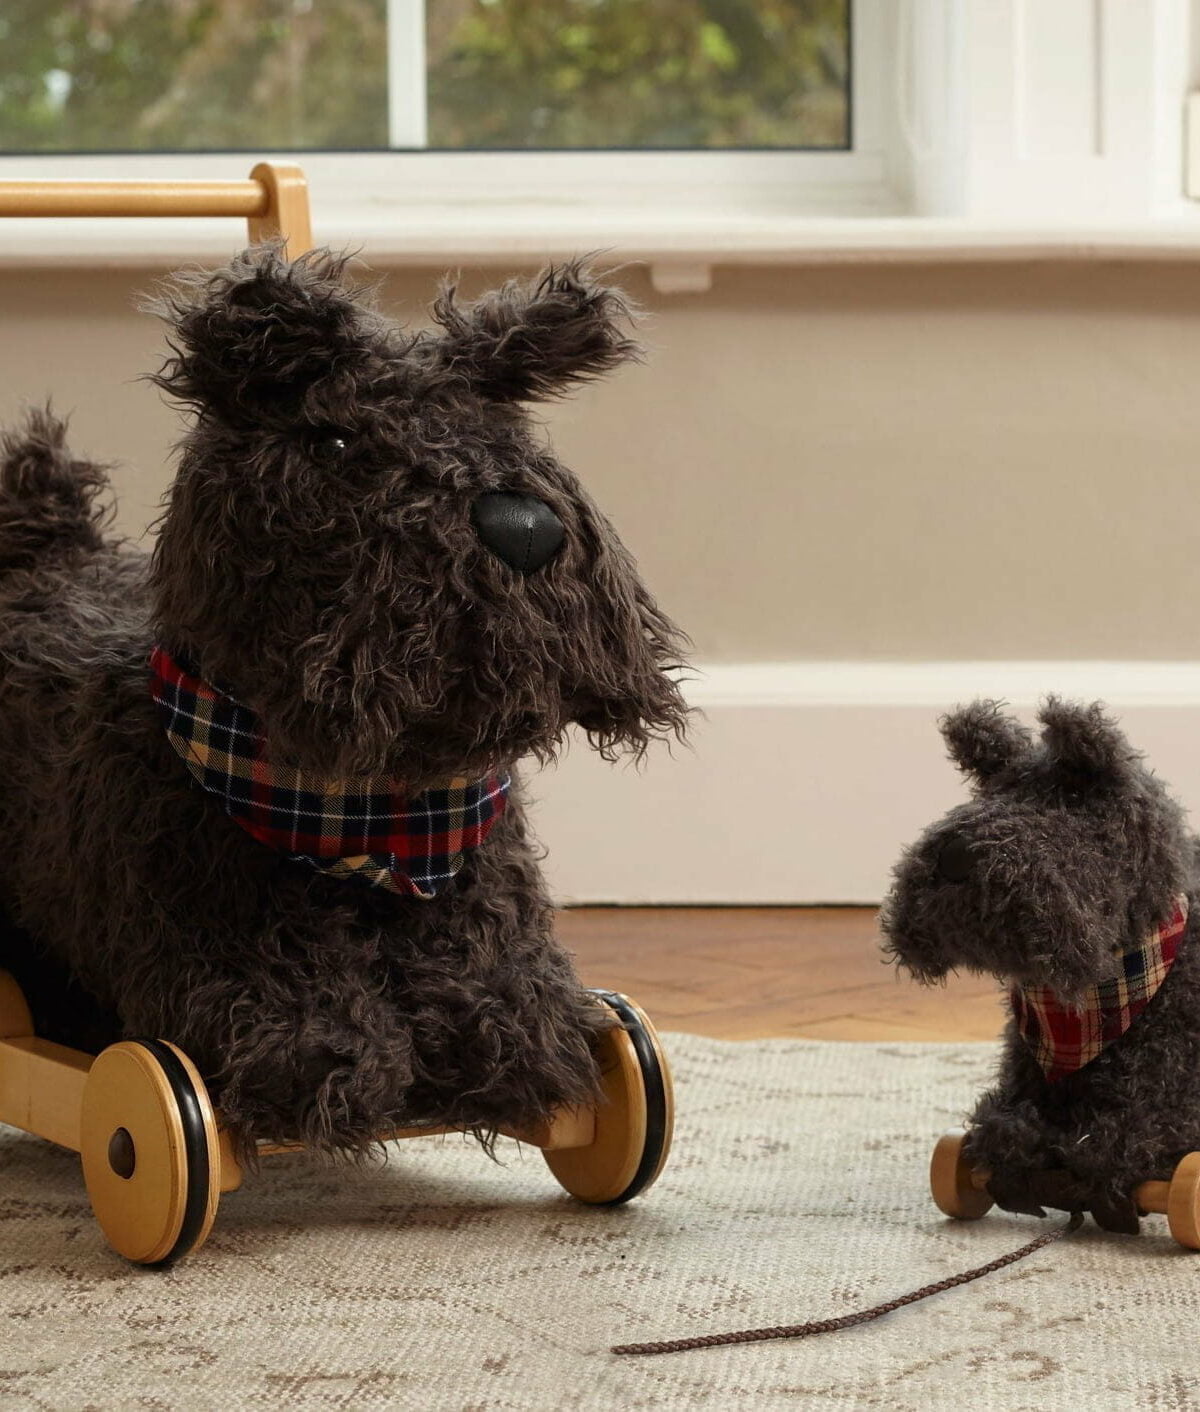 Scottie Dog Baby Walker and Scottie Dog Pull Along Toy standing on cream rug